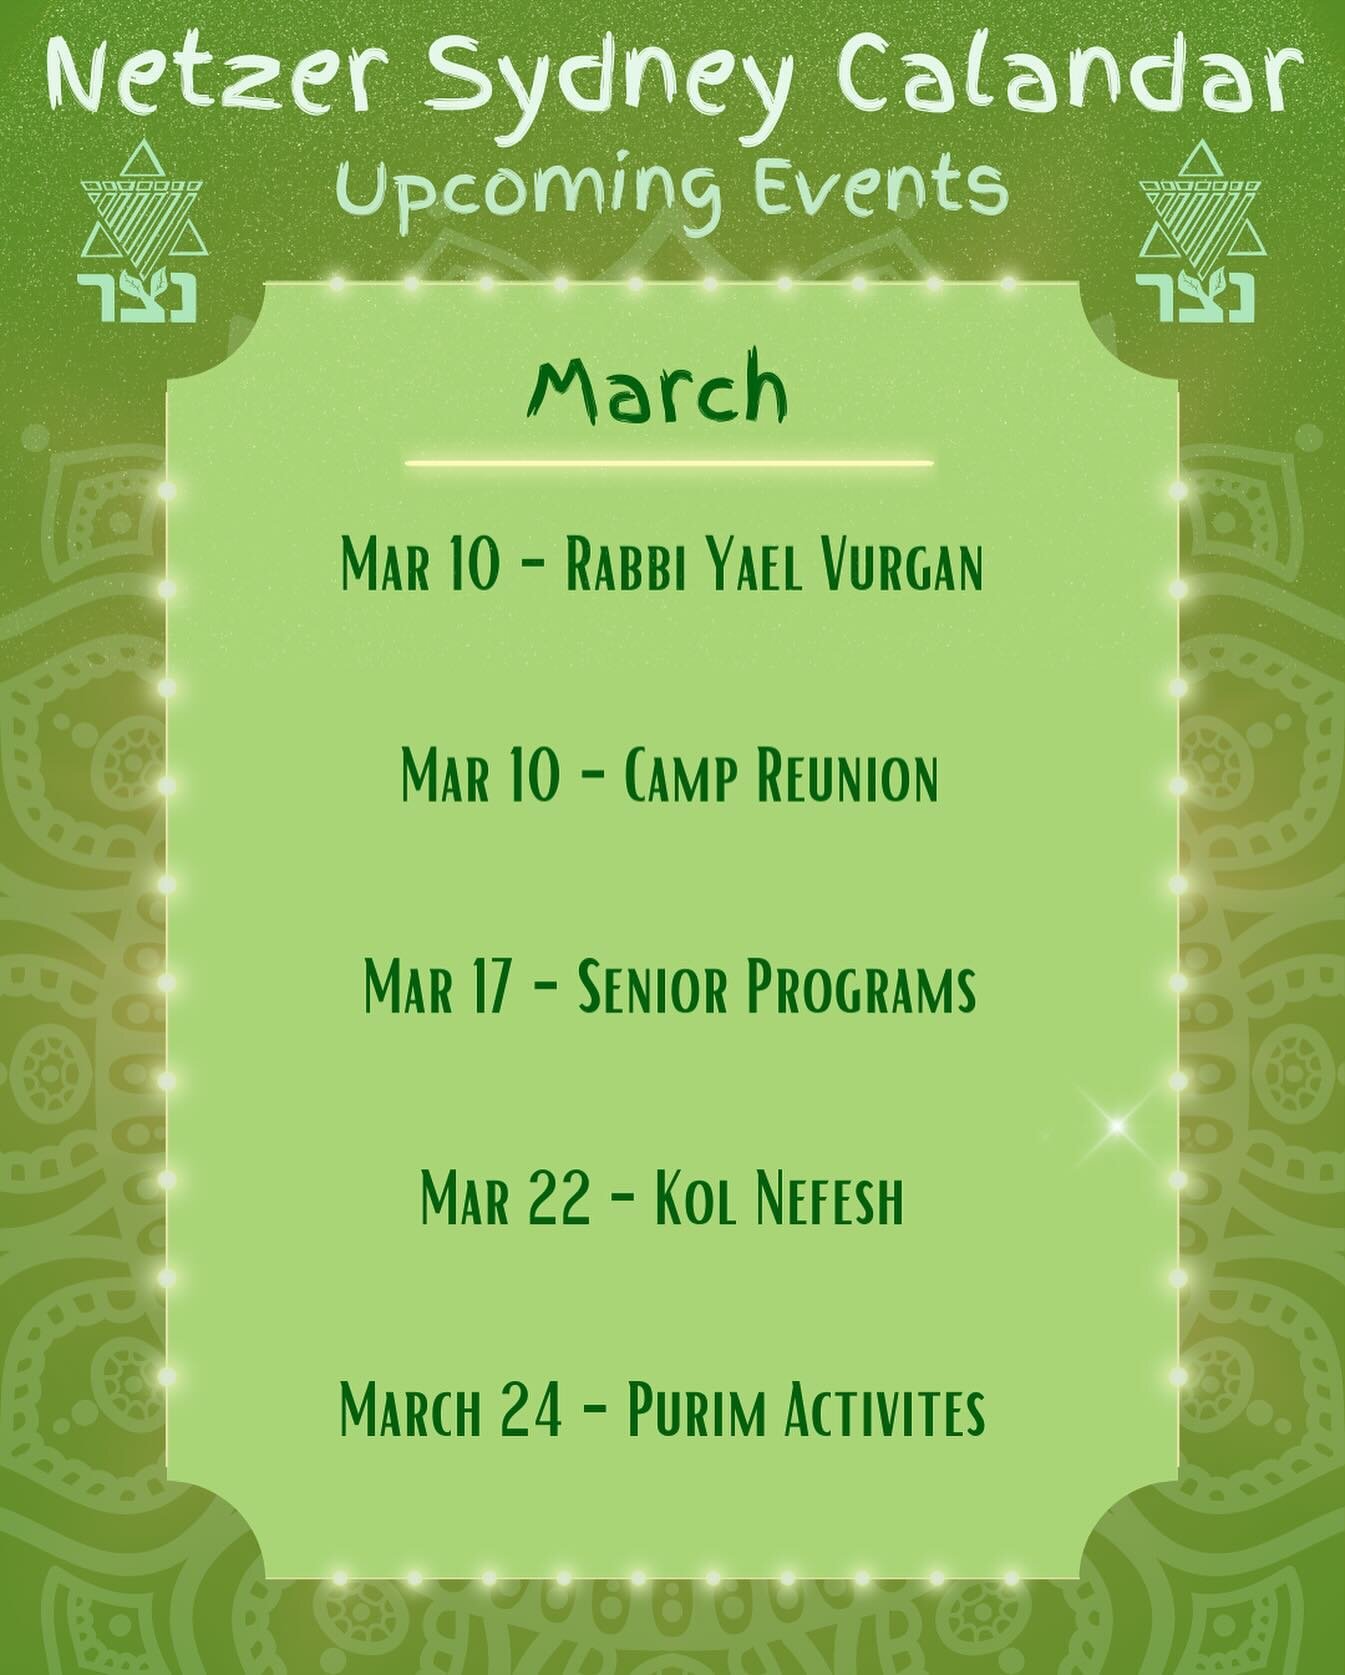 Here are the netzer events for March! 💚